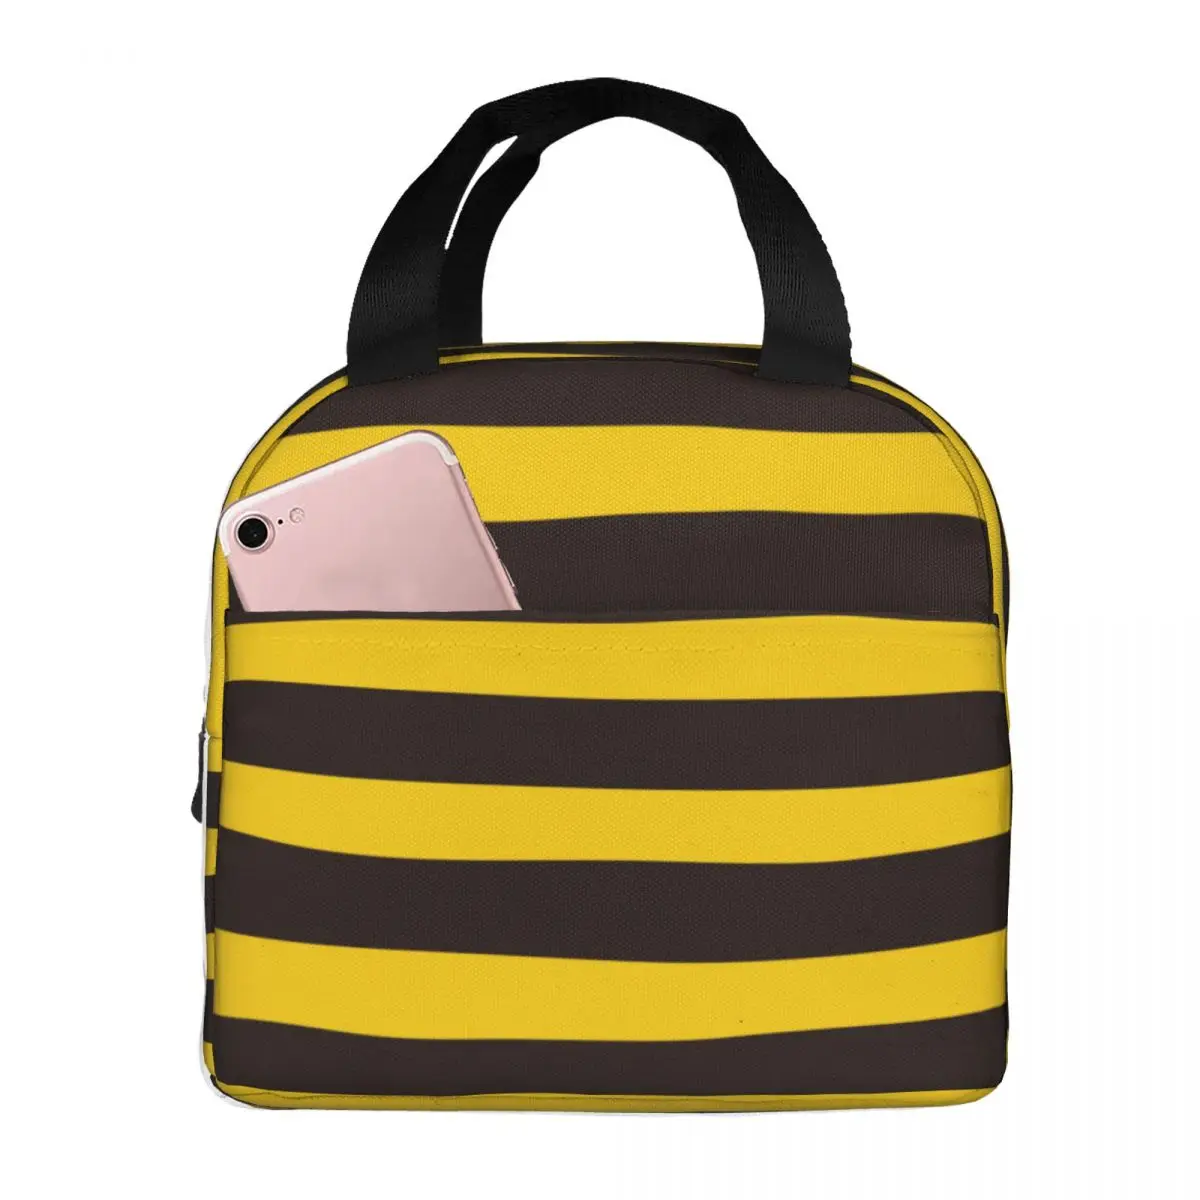 Bumble Bee Stripe Lunch Bag Waterproof Insulated Canvas Cooler Thermal Food Picnic Tote for Women Children